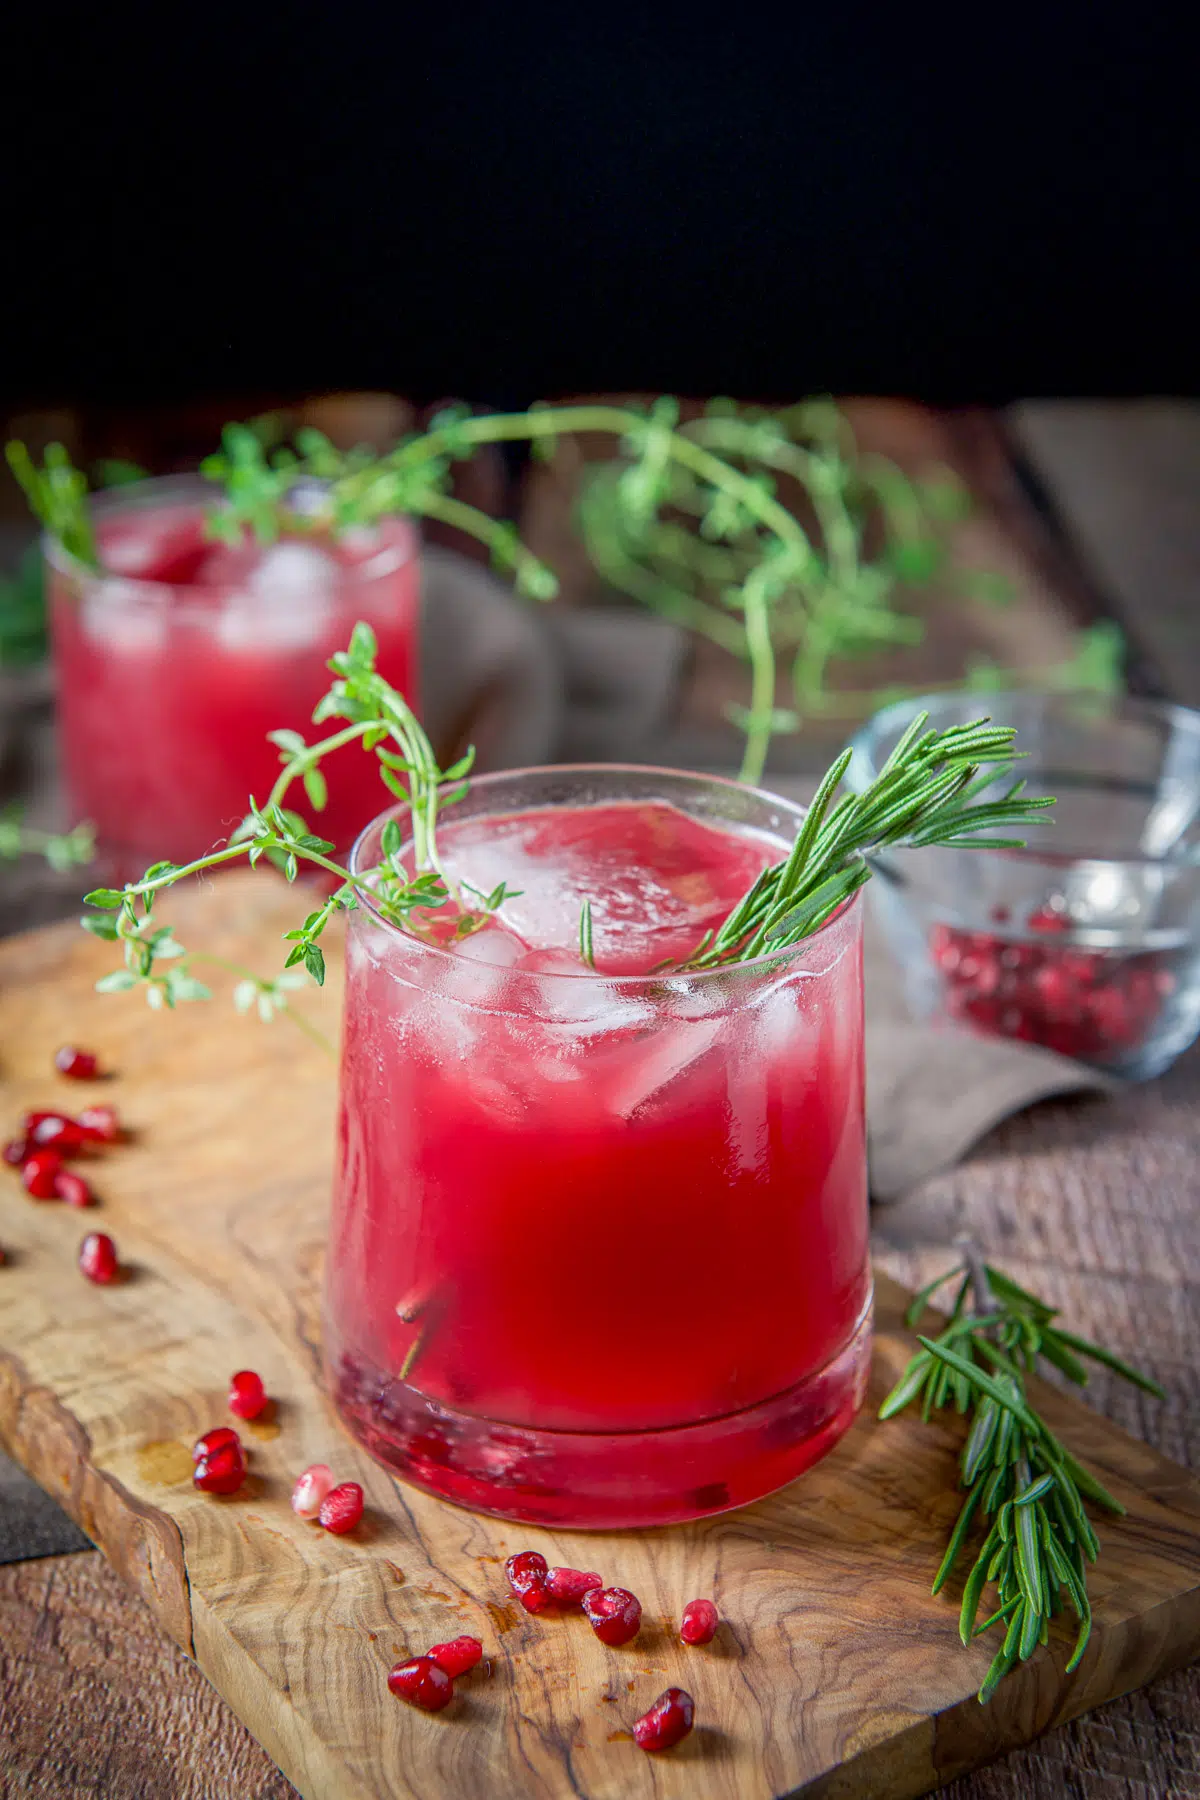 A board with a glass filled with the red drink with arils, rosemary, and thyme in it